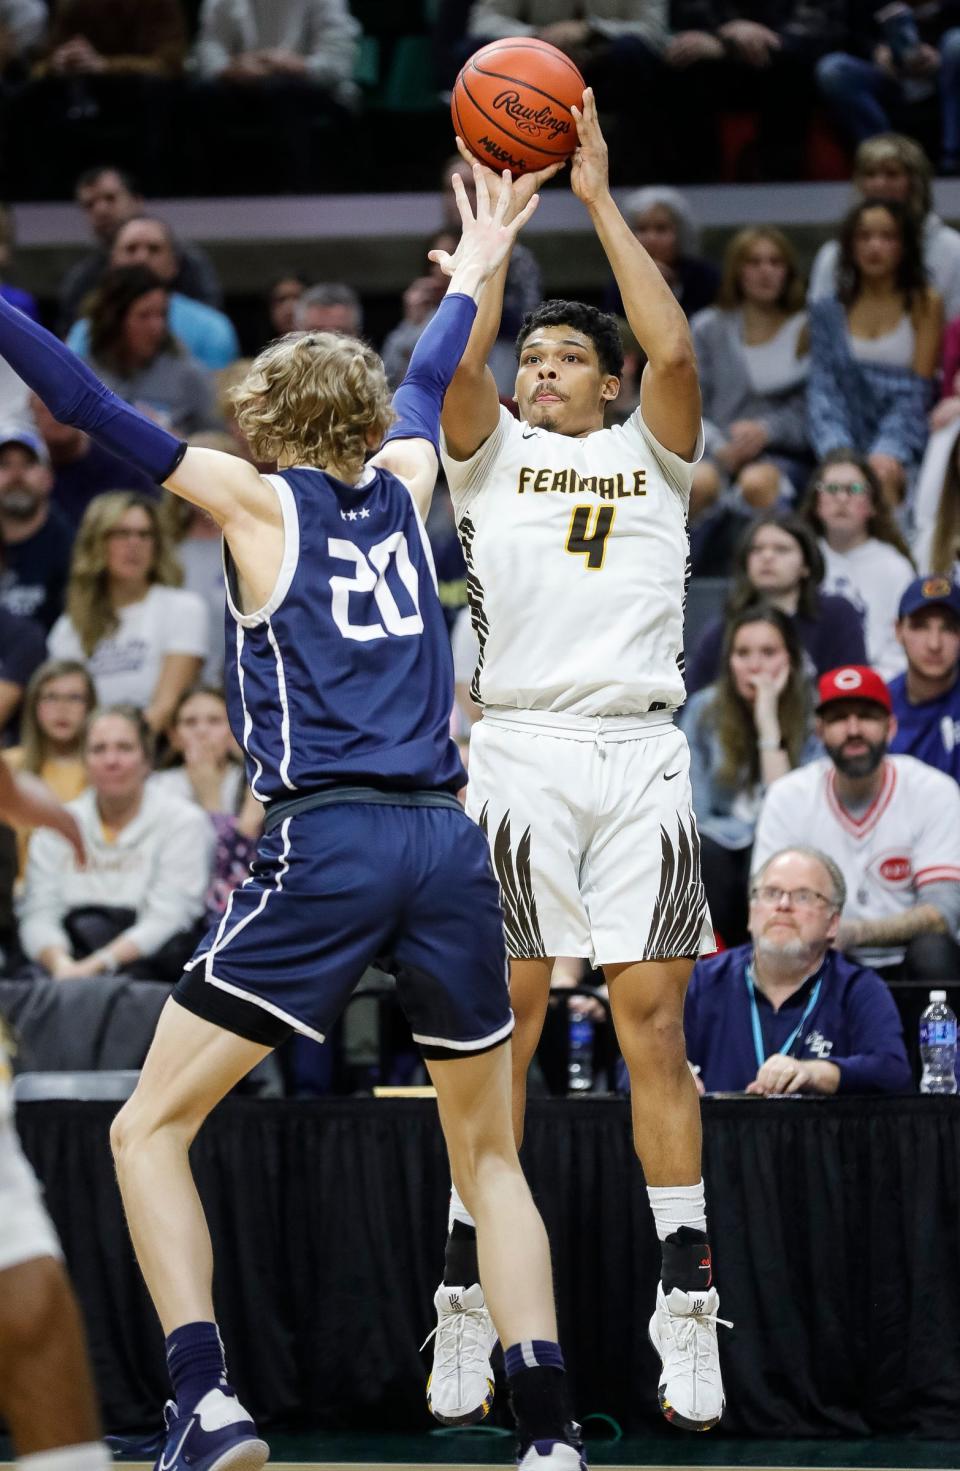 Ferndale guard Noah Blocker (4) makes a jump shot against Grand Rapids South Christian forward Sam Medendorp (20) during the second half of MHSAA boys Division 2 final at Breslin Center in East Lansing on Saturday, March 25, 2023.